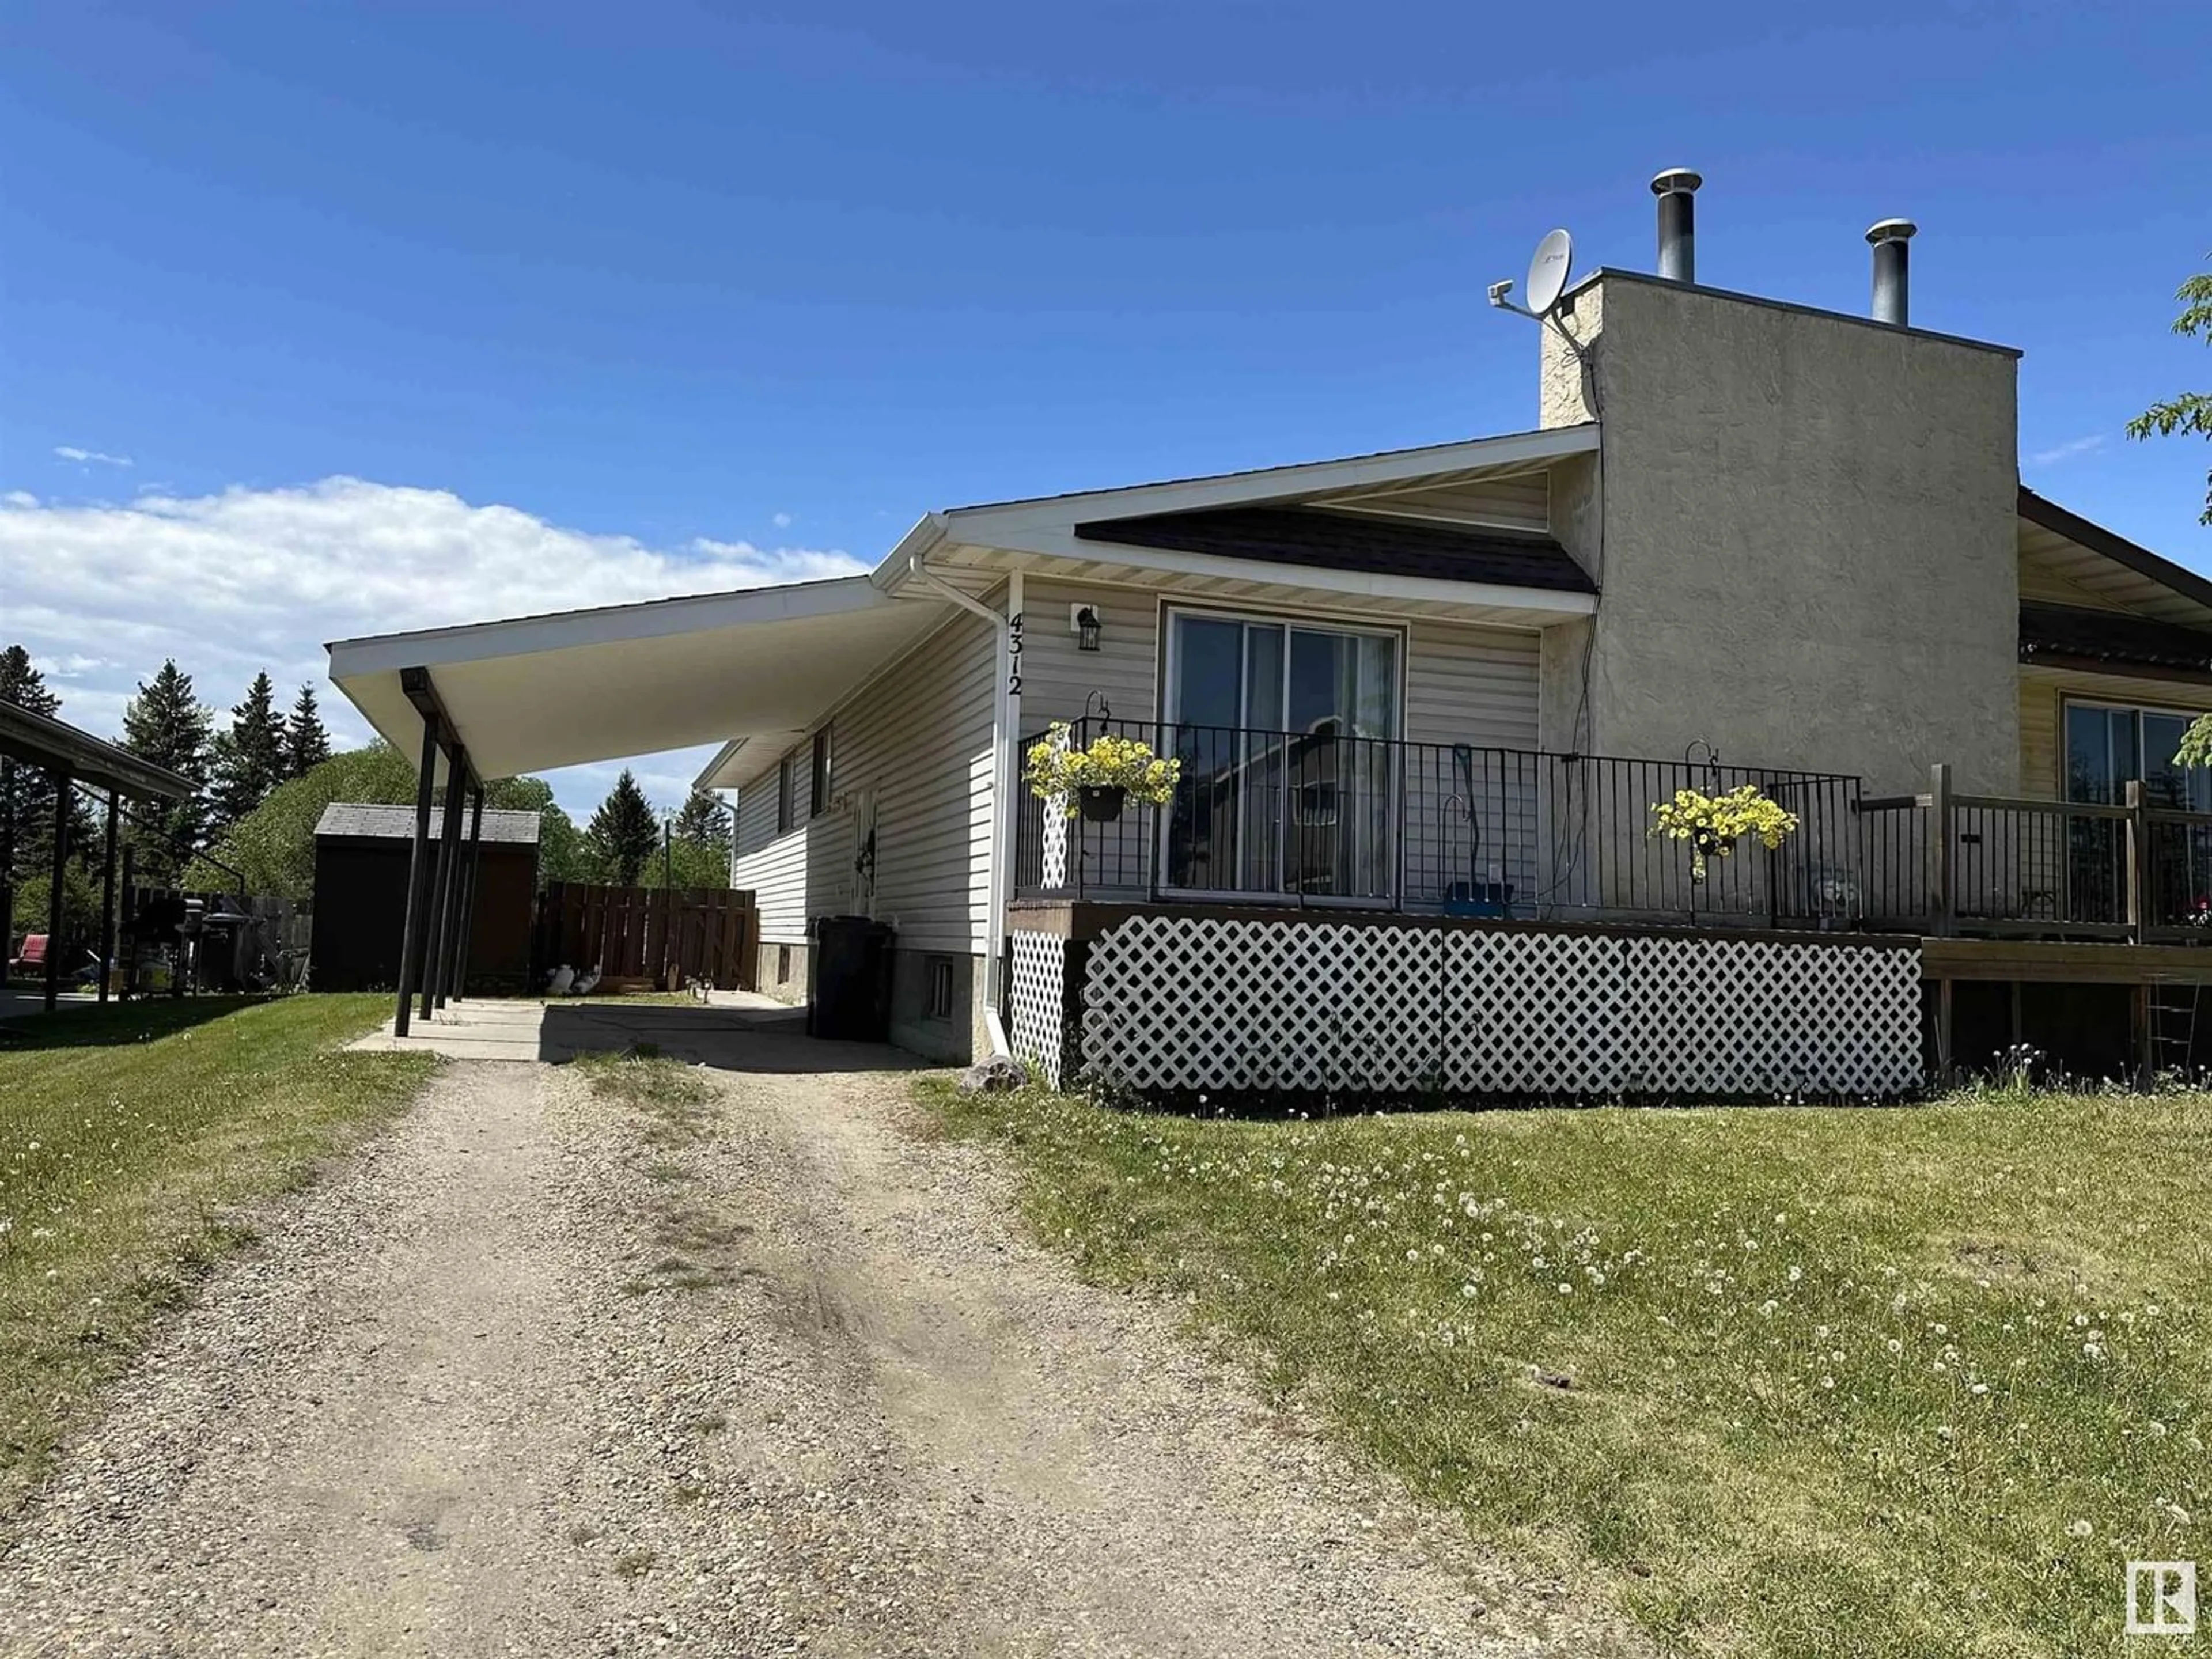 Outside view for 4312 56 ST, Drayton Valley Alberta T7A1K4